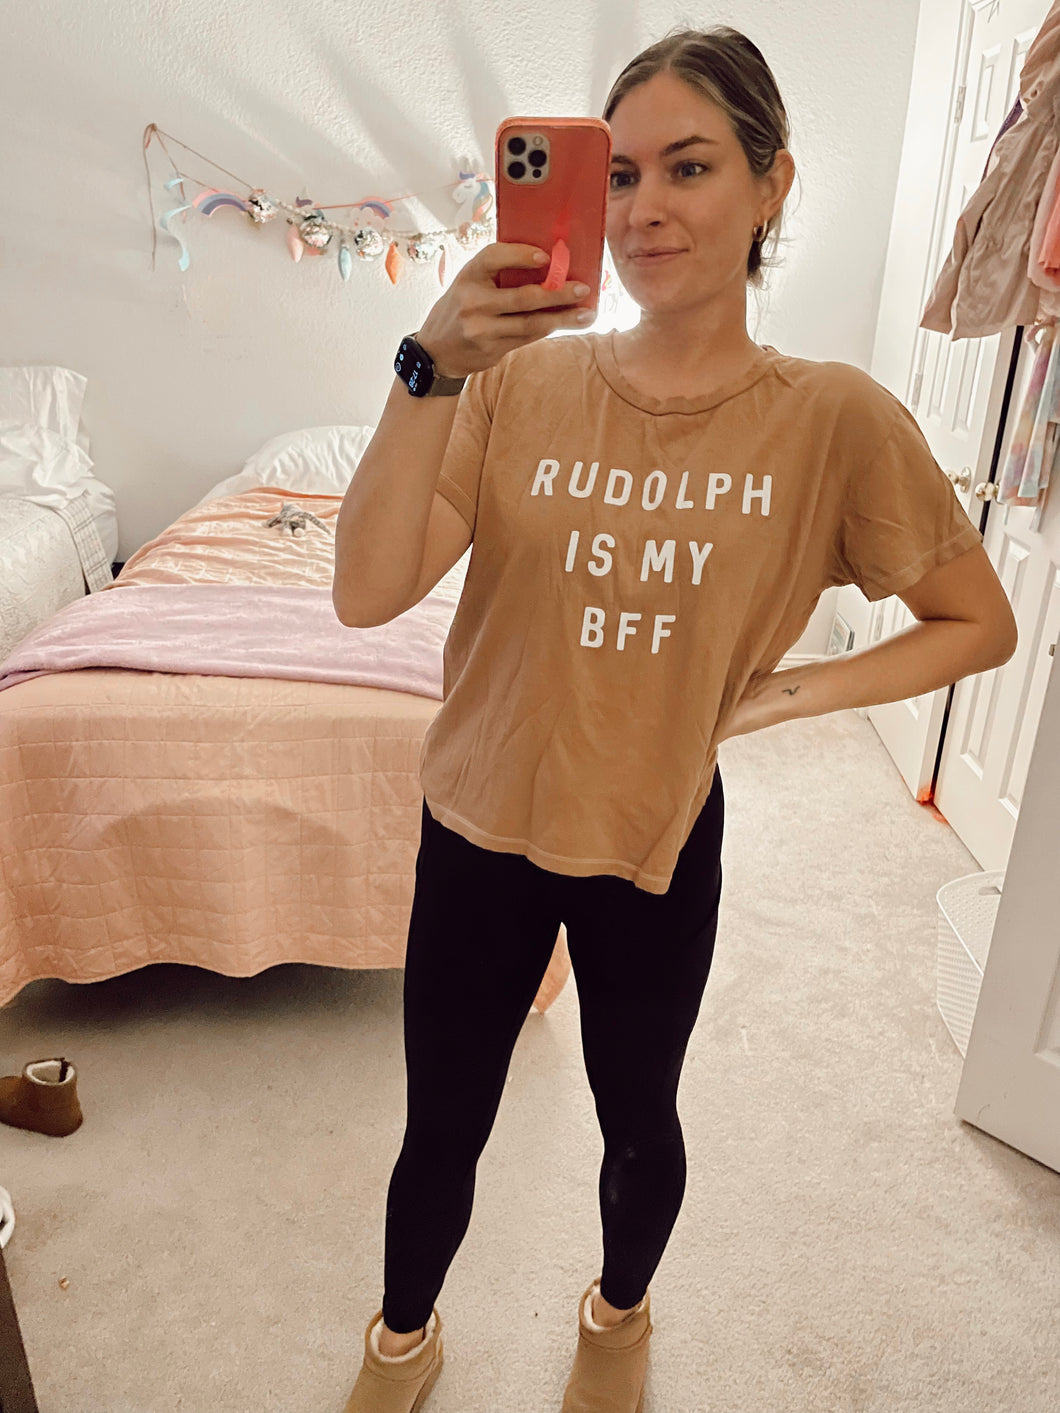 Rudolph is my BFF Tee | Adult